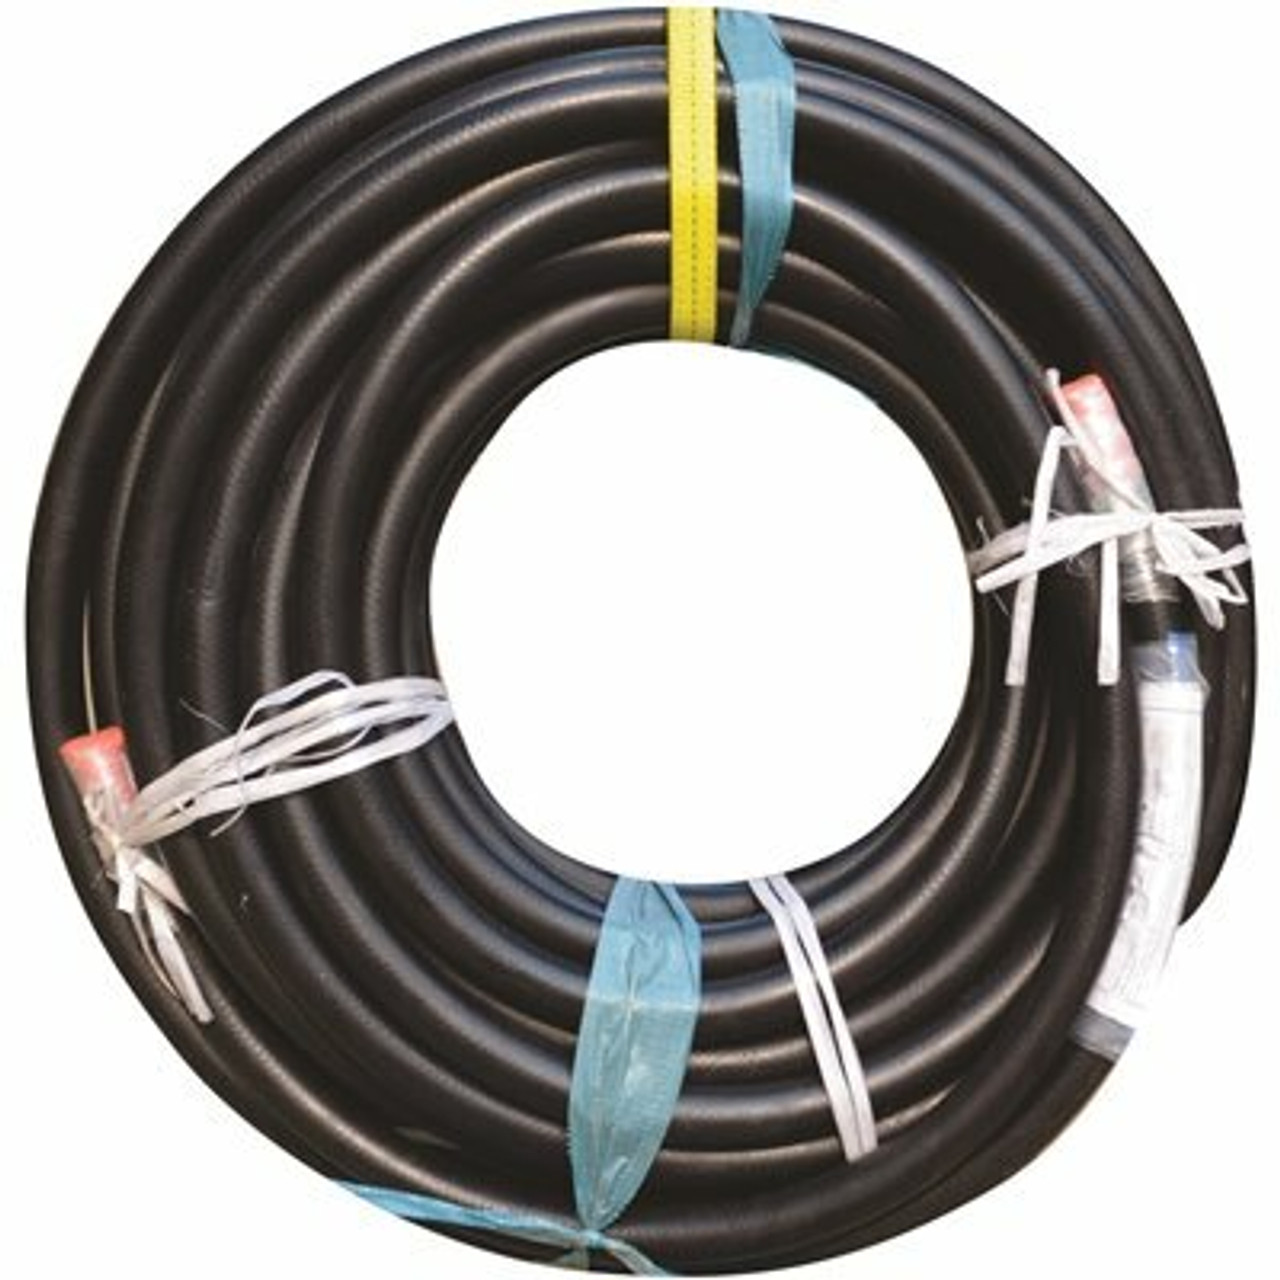 Enerco 1.25 In. X 15 Ft. High Pressure Liquid Propane Gas Rubber Hose Assembly With Mnpt X Mnpt